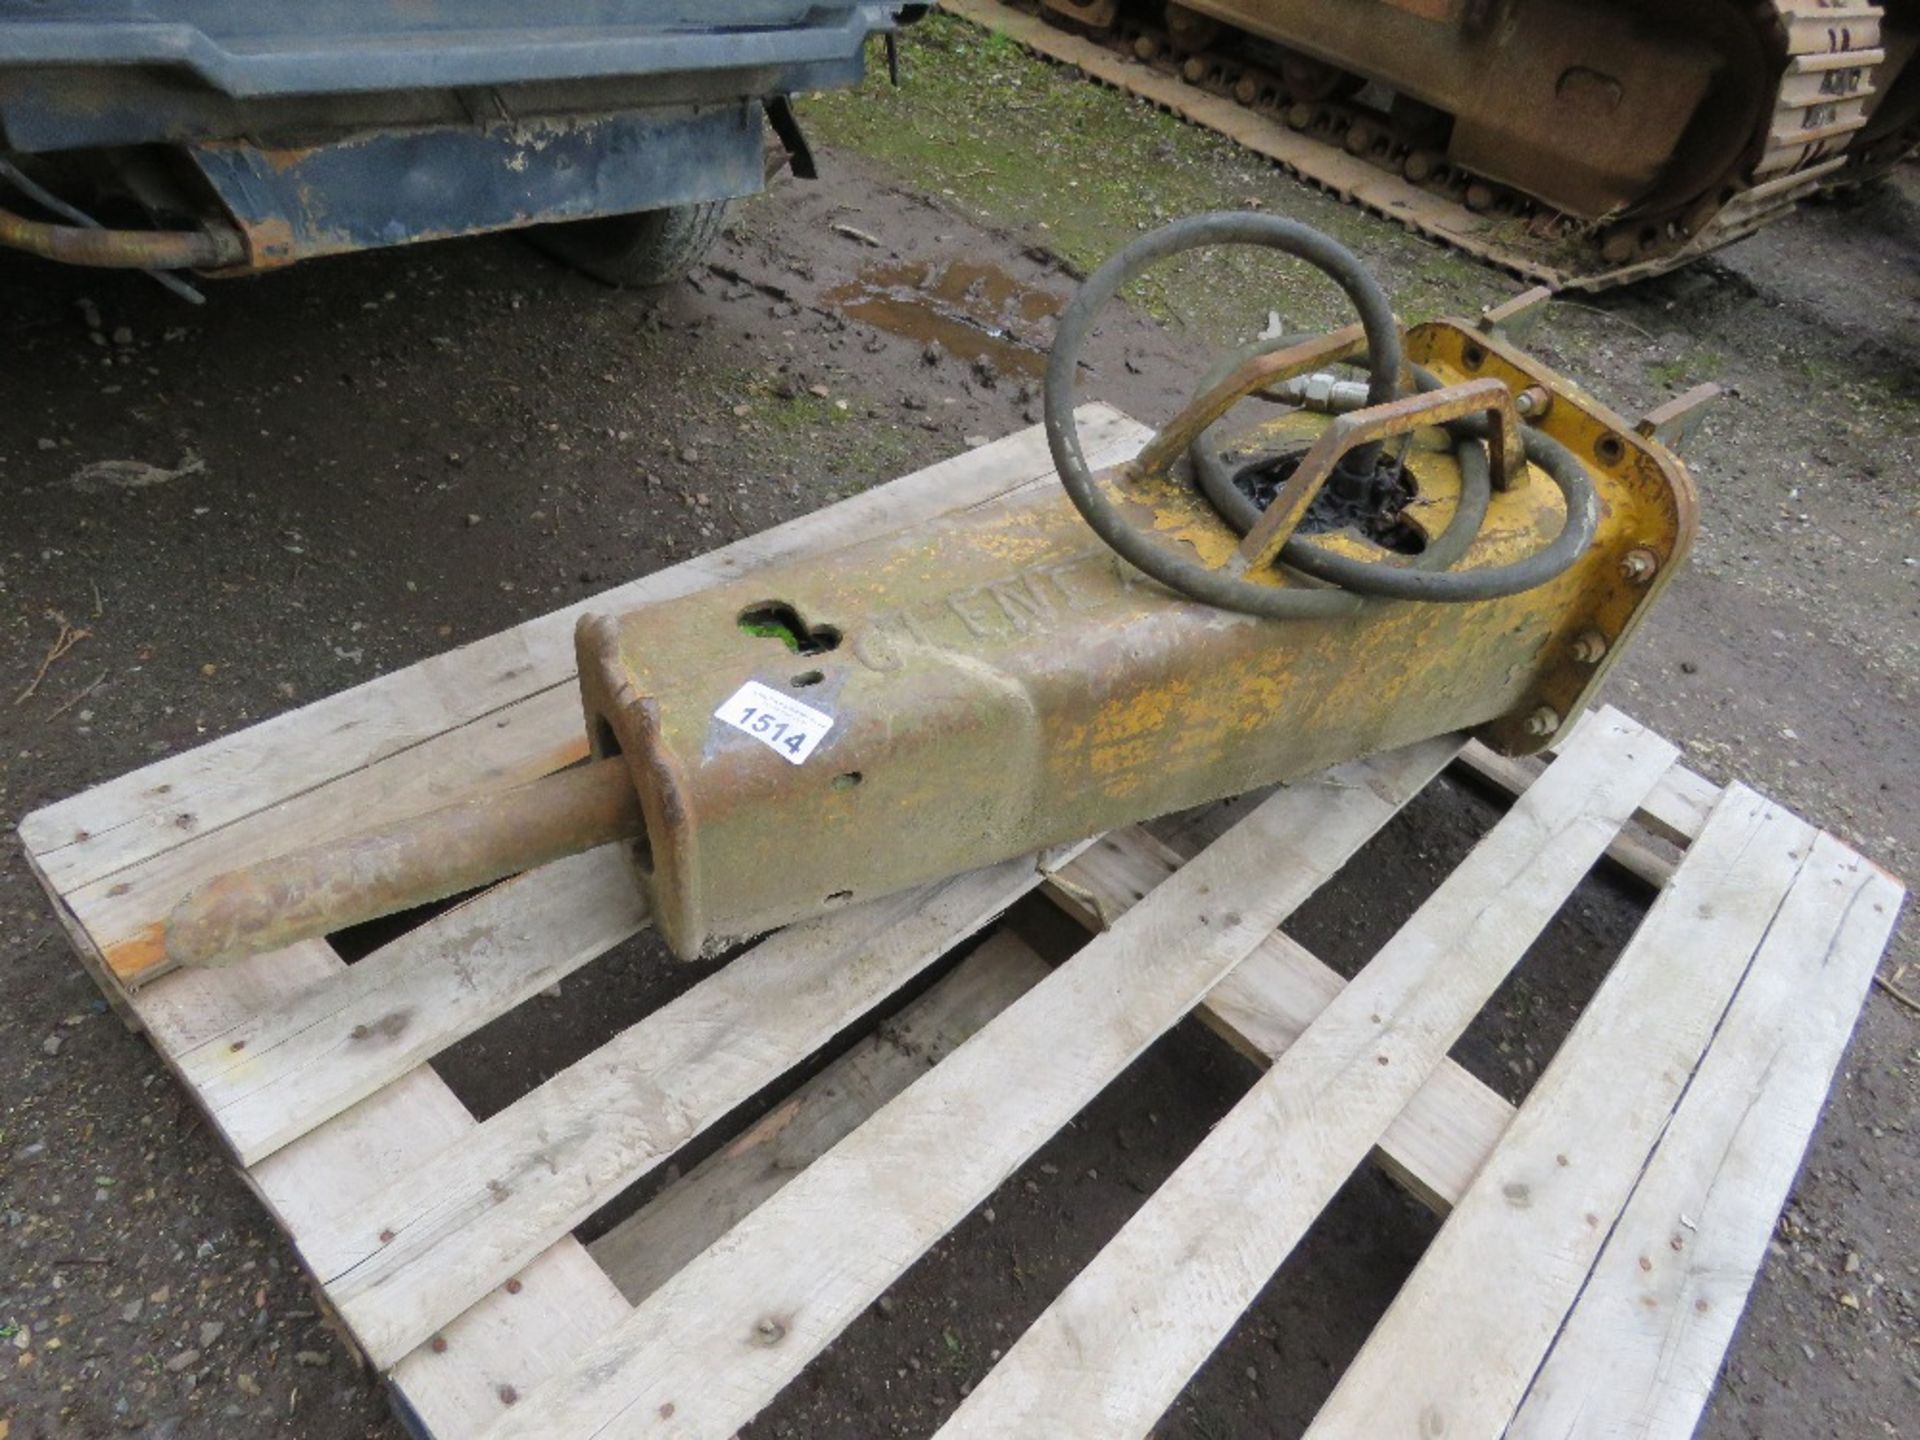 EXCAVATOR MOUNTED HYDRAULIC BREAKER SUITABLE FOR 3-5 TONNE EXCVATOR, REQUIRES HEADSTOCK. ....THIS LO